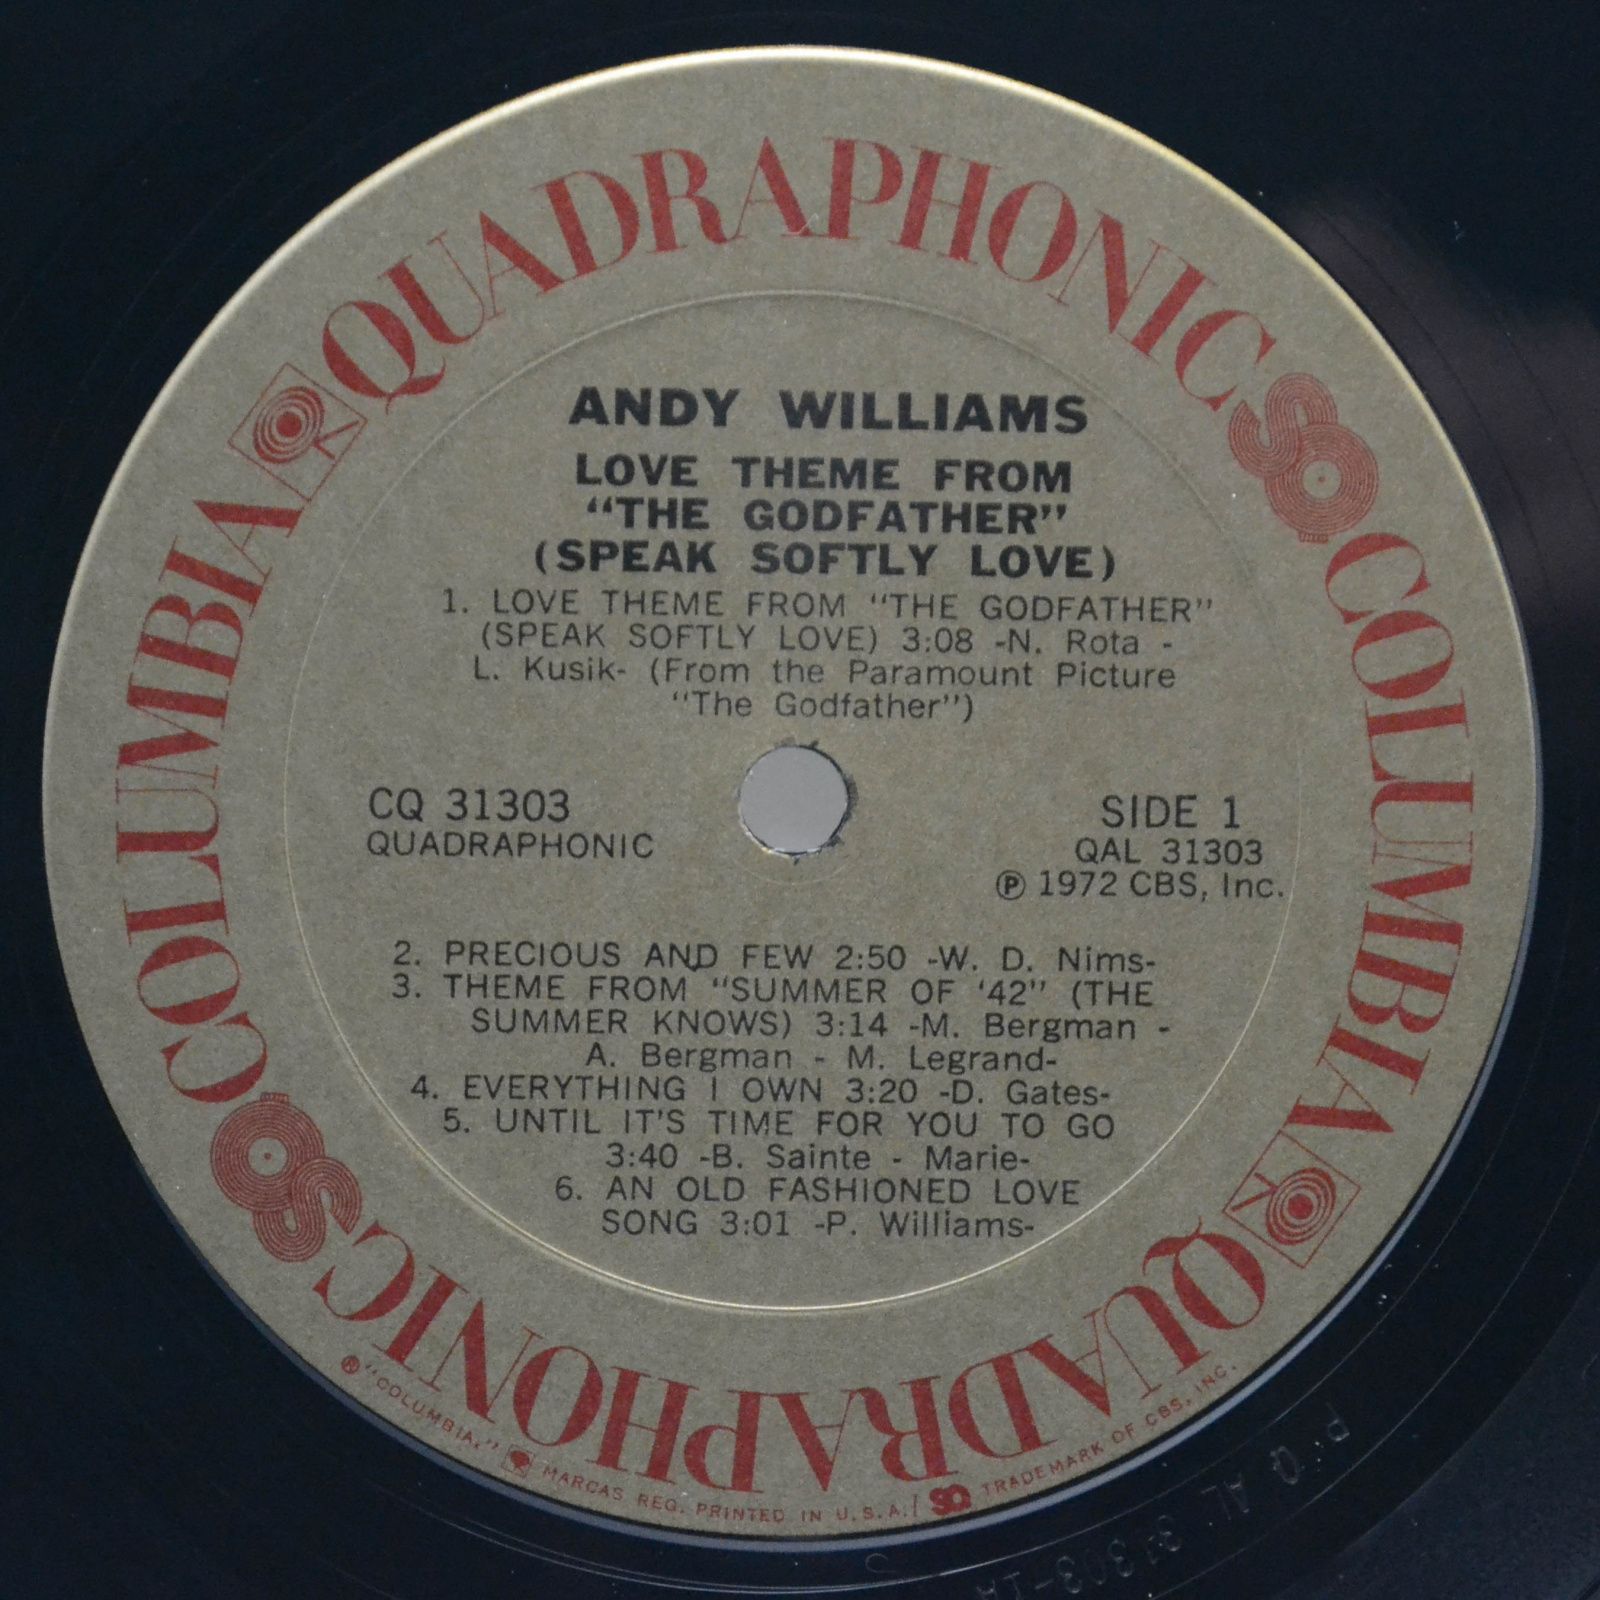 Andy Williams — Love Theme From "The Godfather" (USA, Quadraphonic), 1972